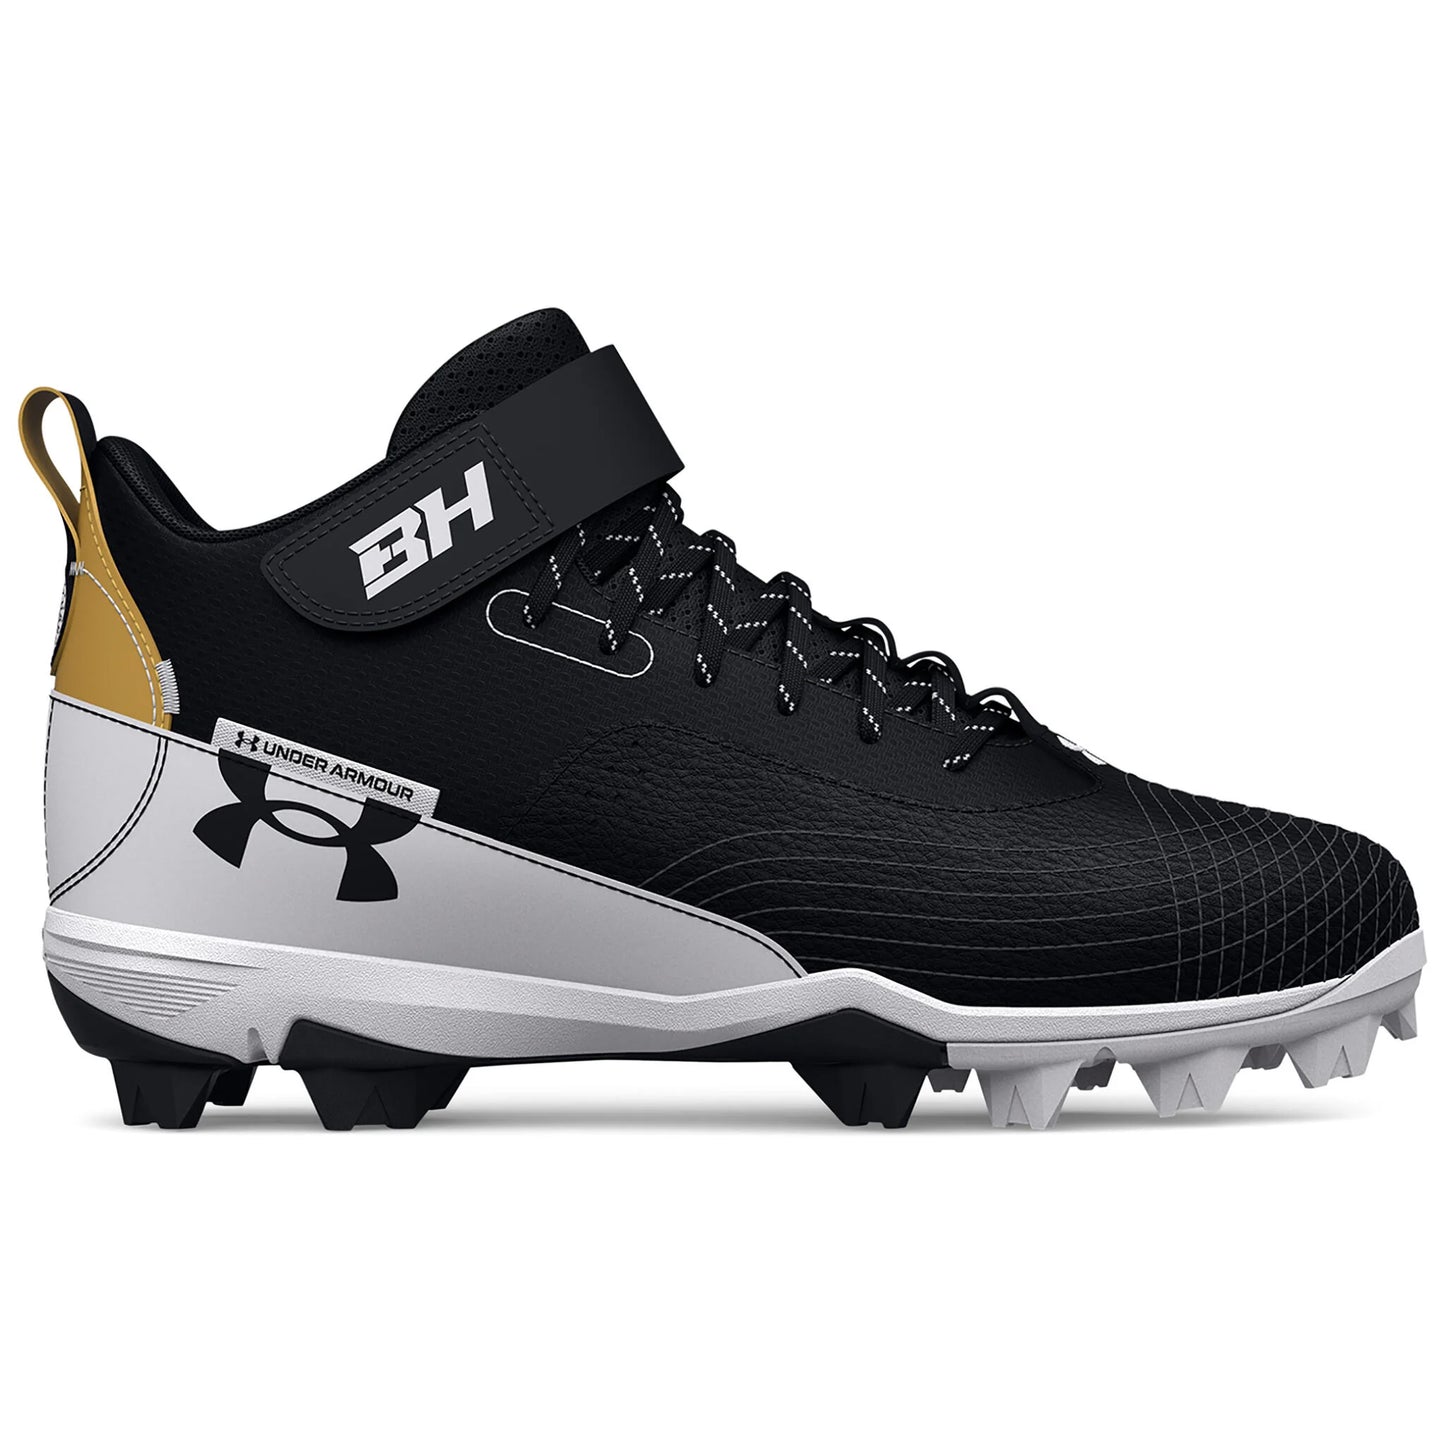 A photo of the Under Armour Harper 7 Mid RM Men's Cleats in colour black side view.